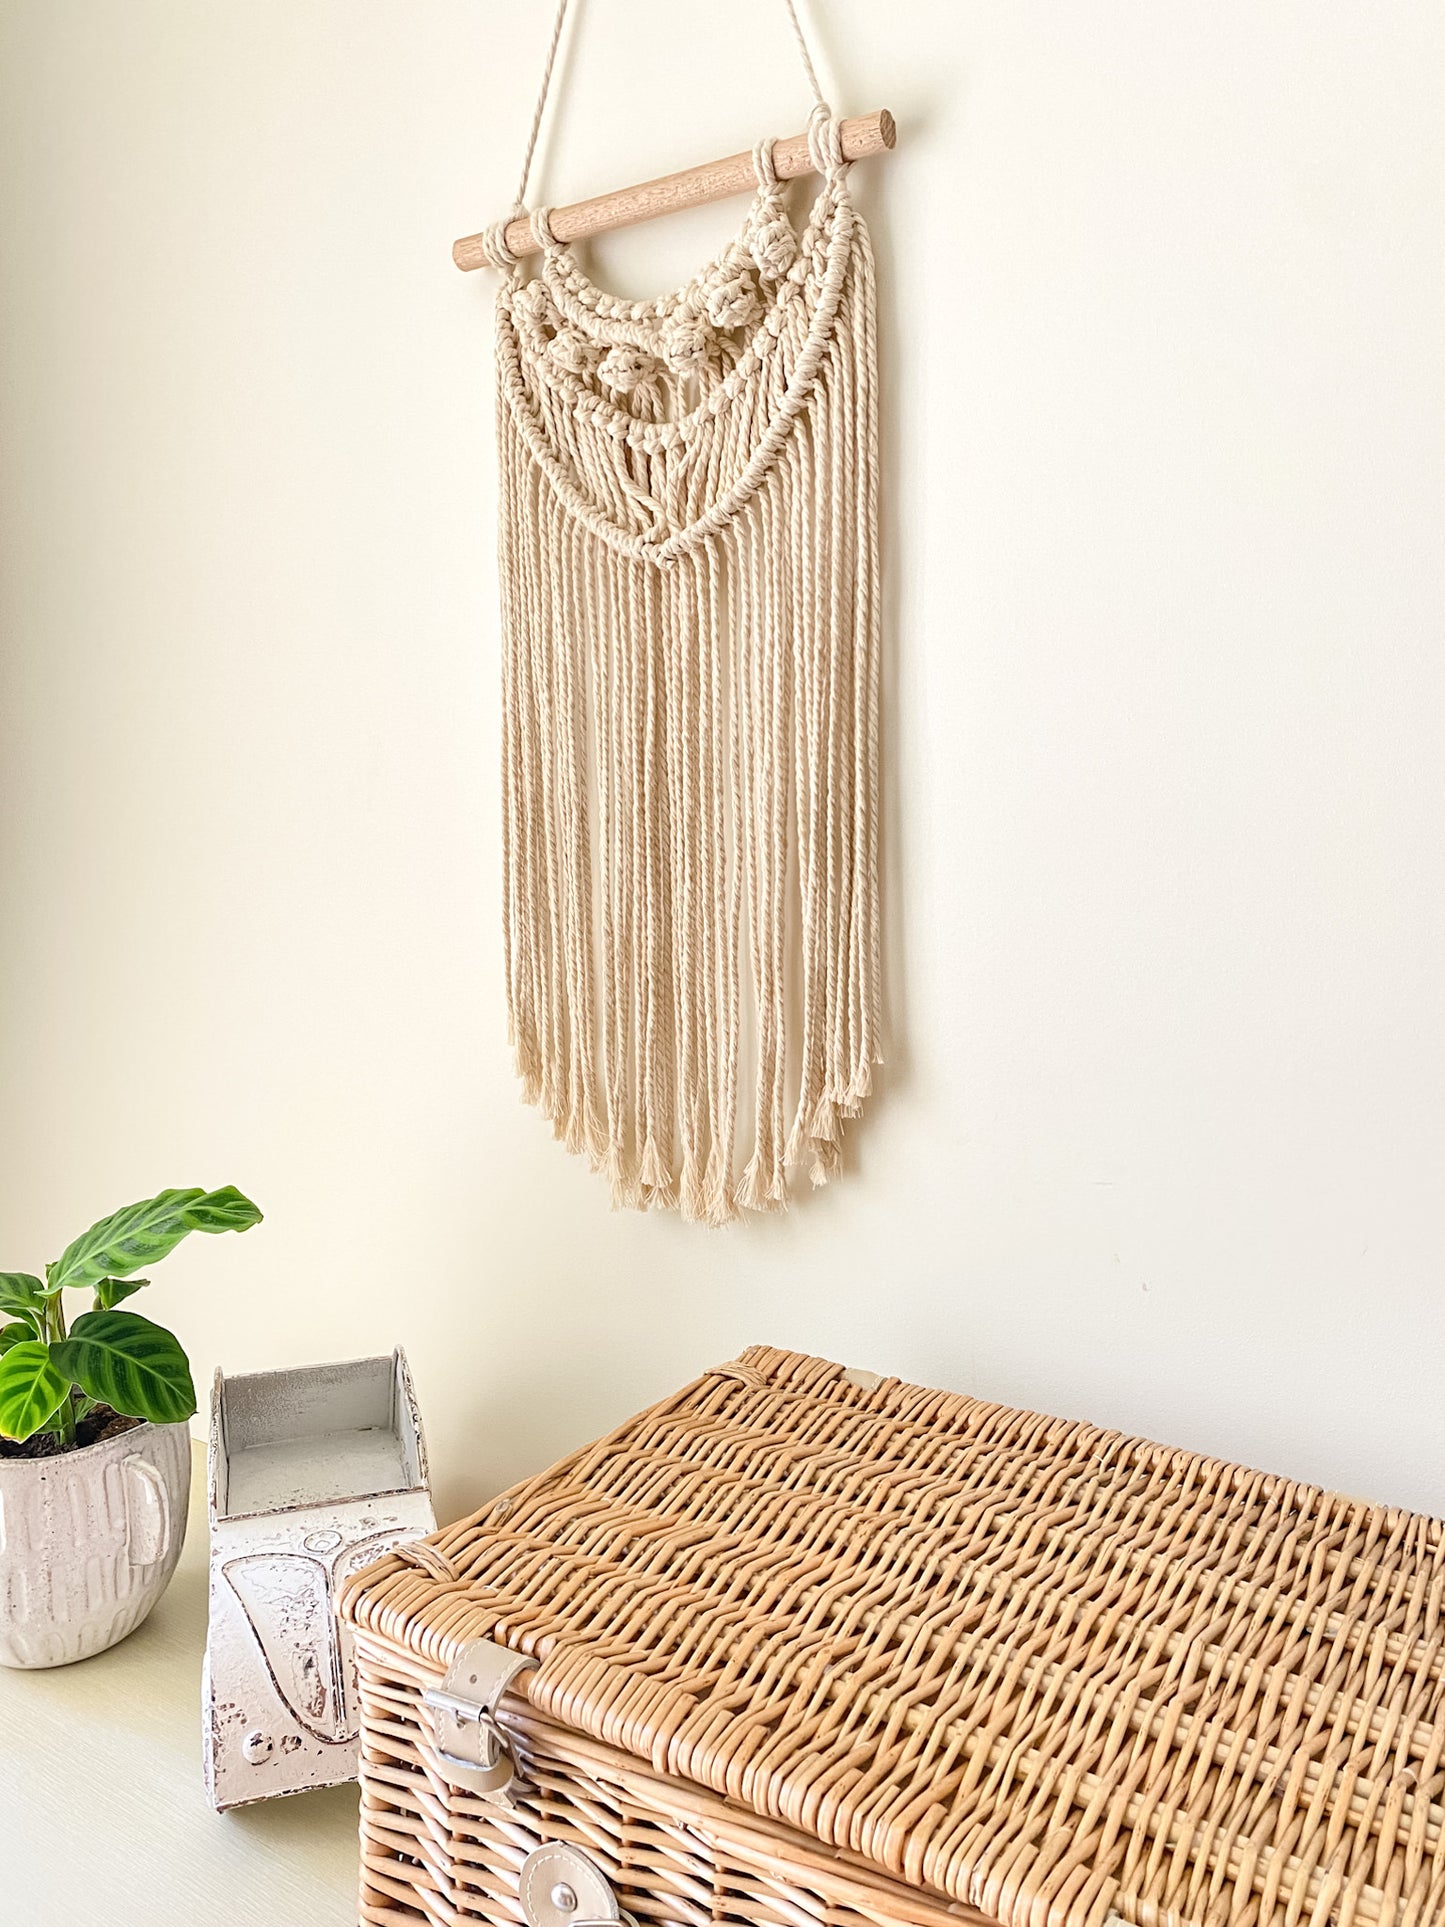 Side view of a natural off white macrame tassels hanging hanged on the wall above a table styled with an indoor plant white coastal themed toy car, rattan picnic basket.